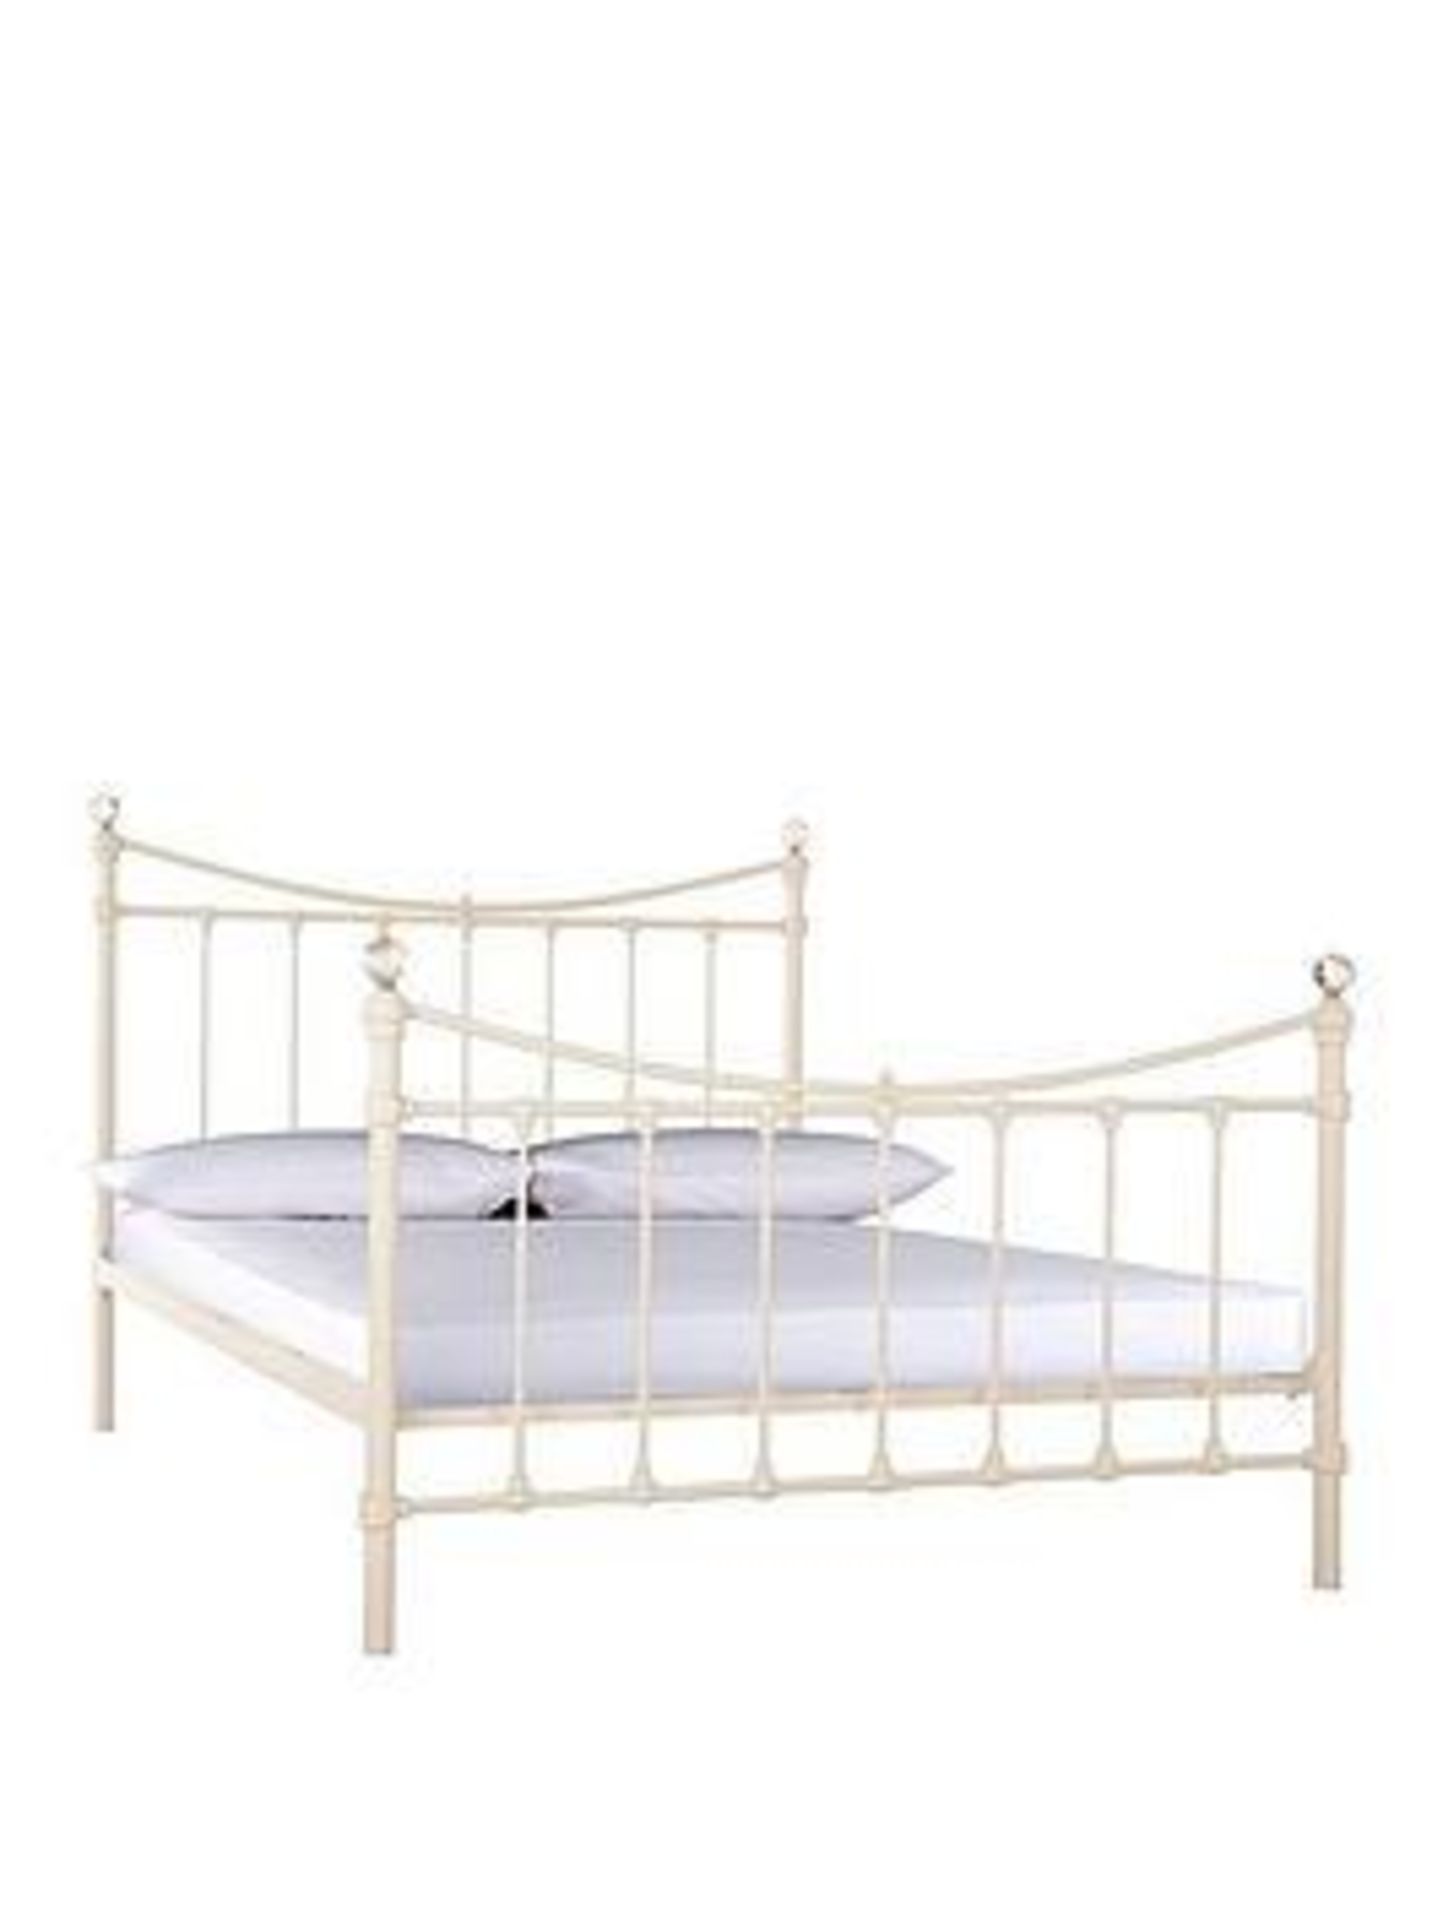 Boxed Item Ruby King Bed [Cream] 120X161X202Cm Rrp:£394.0 - Image 2 of 2